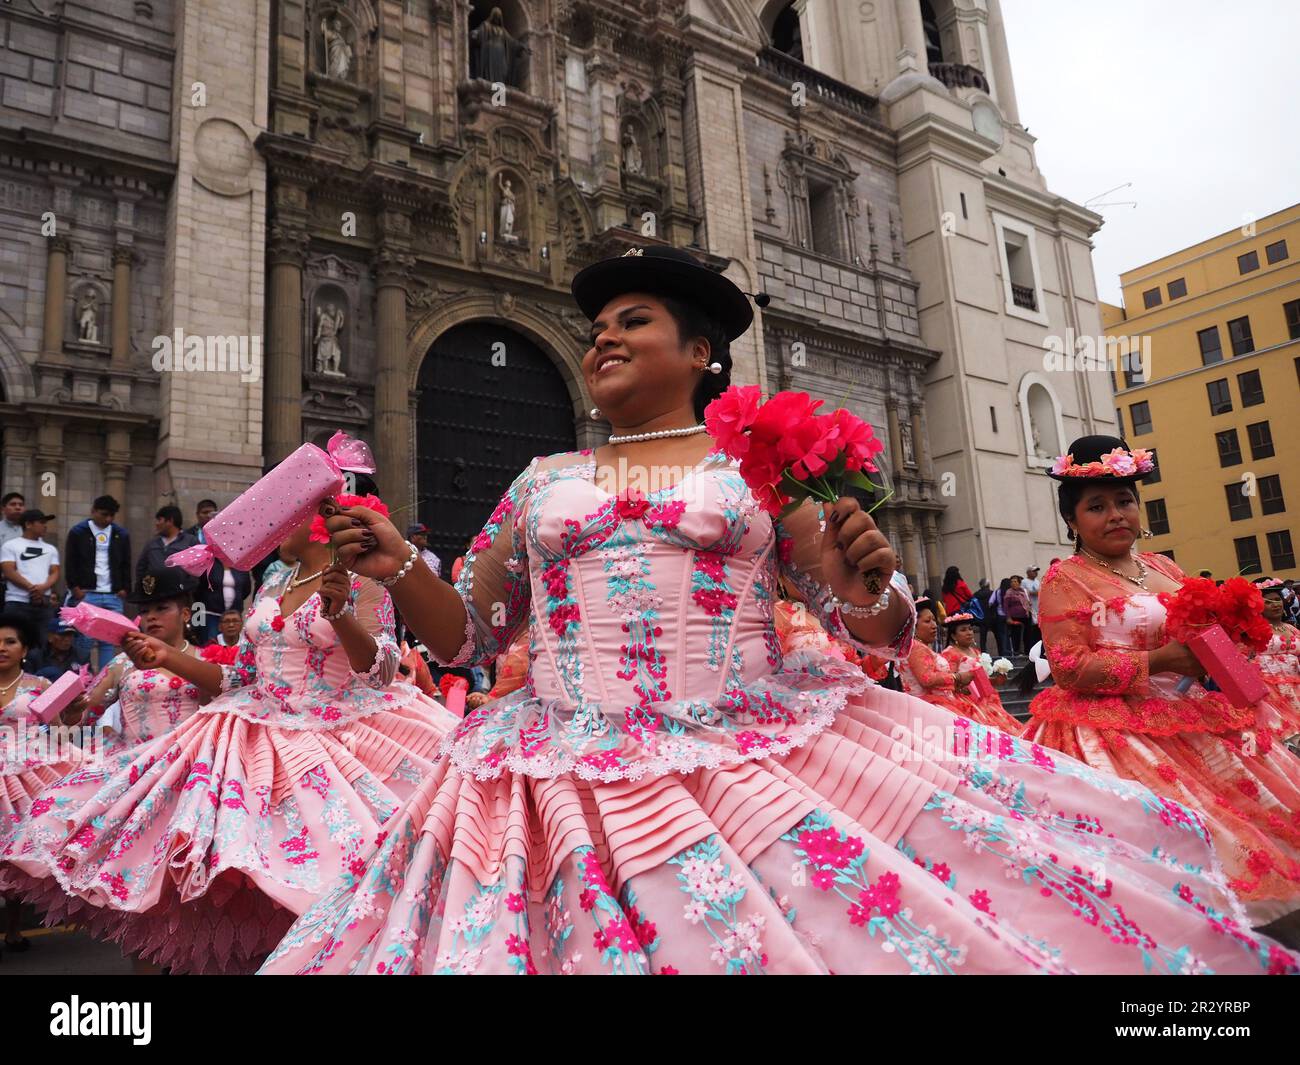 Lima, Peru. 21st May, 2023. Group of women performing when Peruvian Indigenous folk dancers wearing traditional costumes from the Andean regions took to the streets of Lima downtown again, as they used to do every Sunday before the pandemic, to spread their colorful dances and ancestral traditions. Credit: Fotoholica Press Agency/Alamy Live News Stock Photo